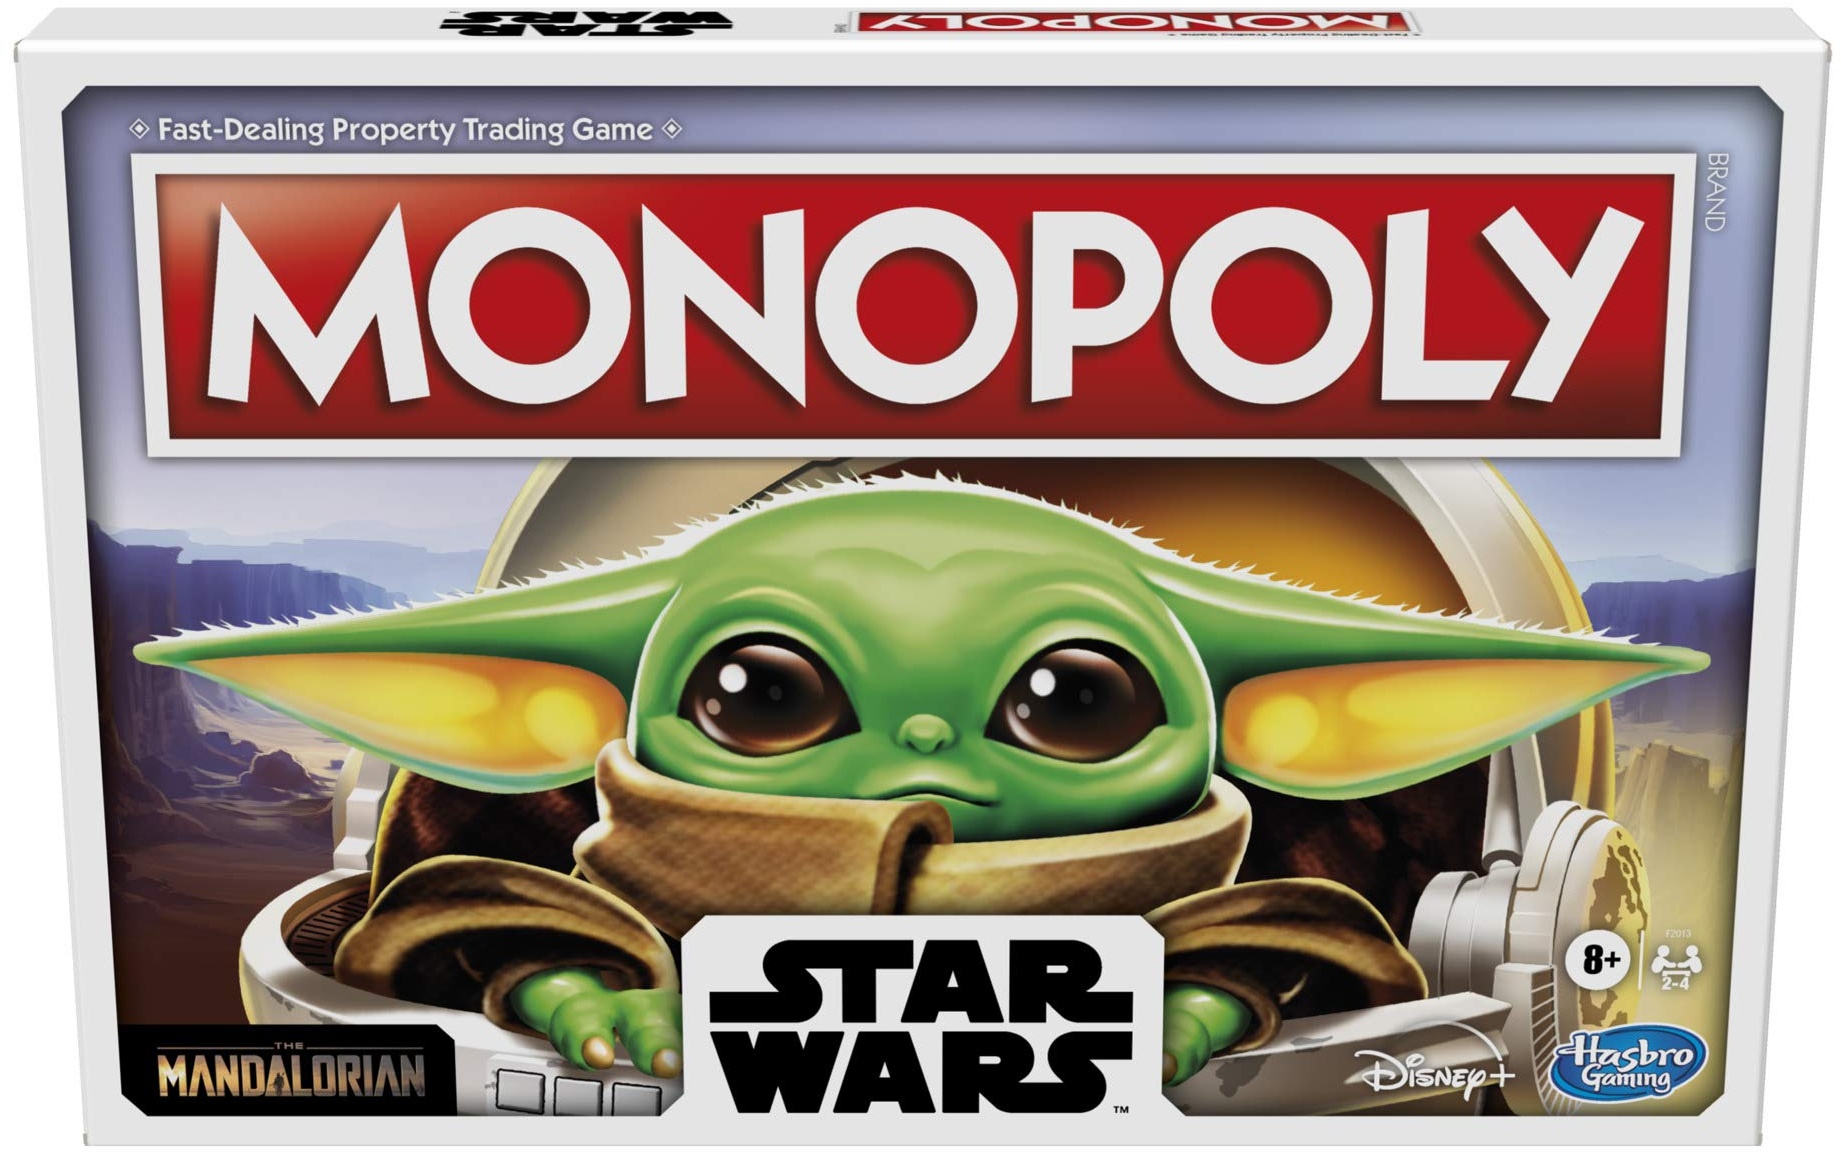 Monopoly: Star Wars The Child Edition Board Game for Families and Kids Ages 8 and Up, Featuring The Child, Who Fans Call 'Baby Yoda',Multicolor